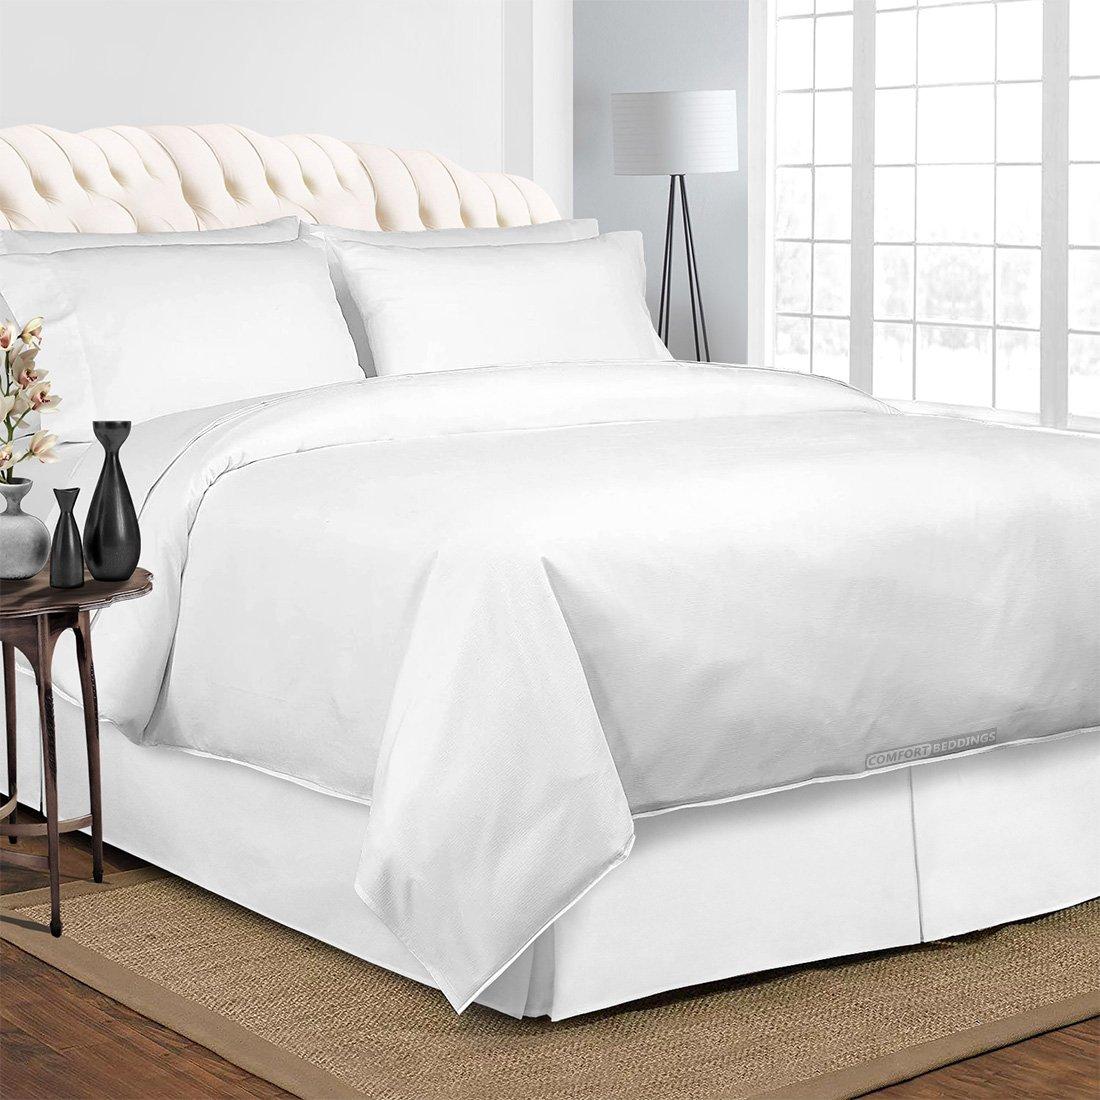 Make your Bedroom More Stylish With White Bed in a Bag Queen